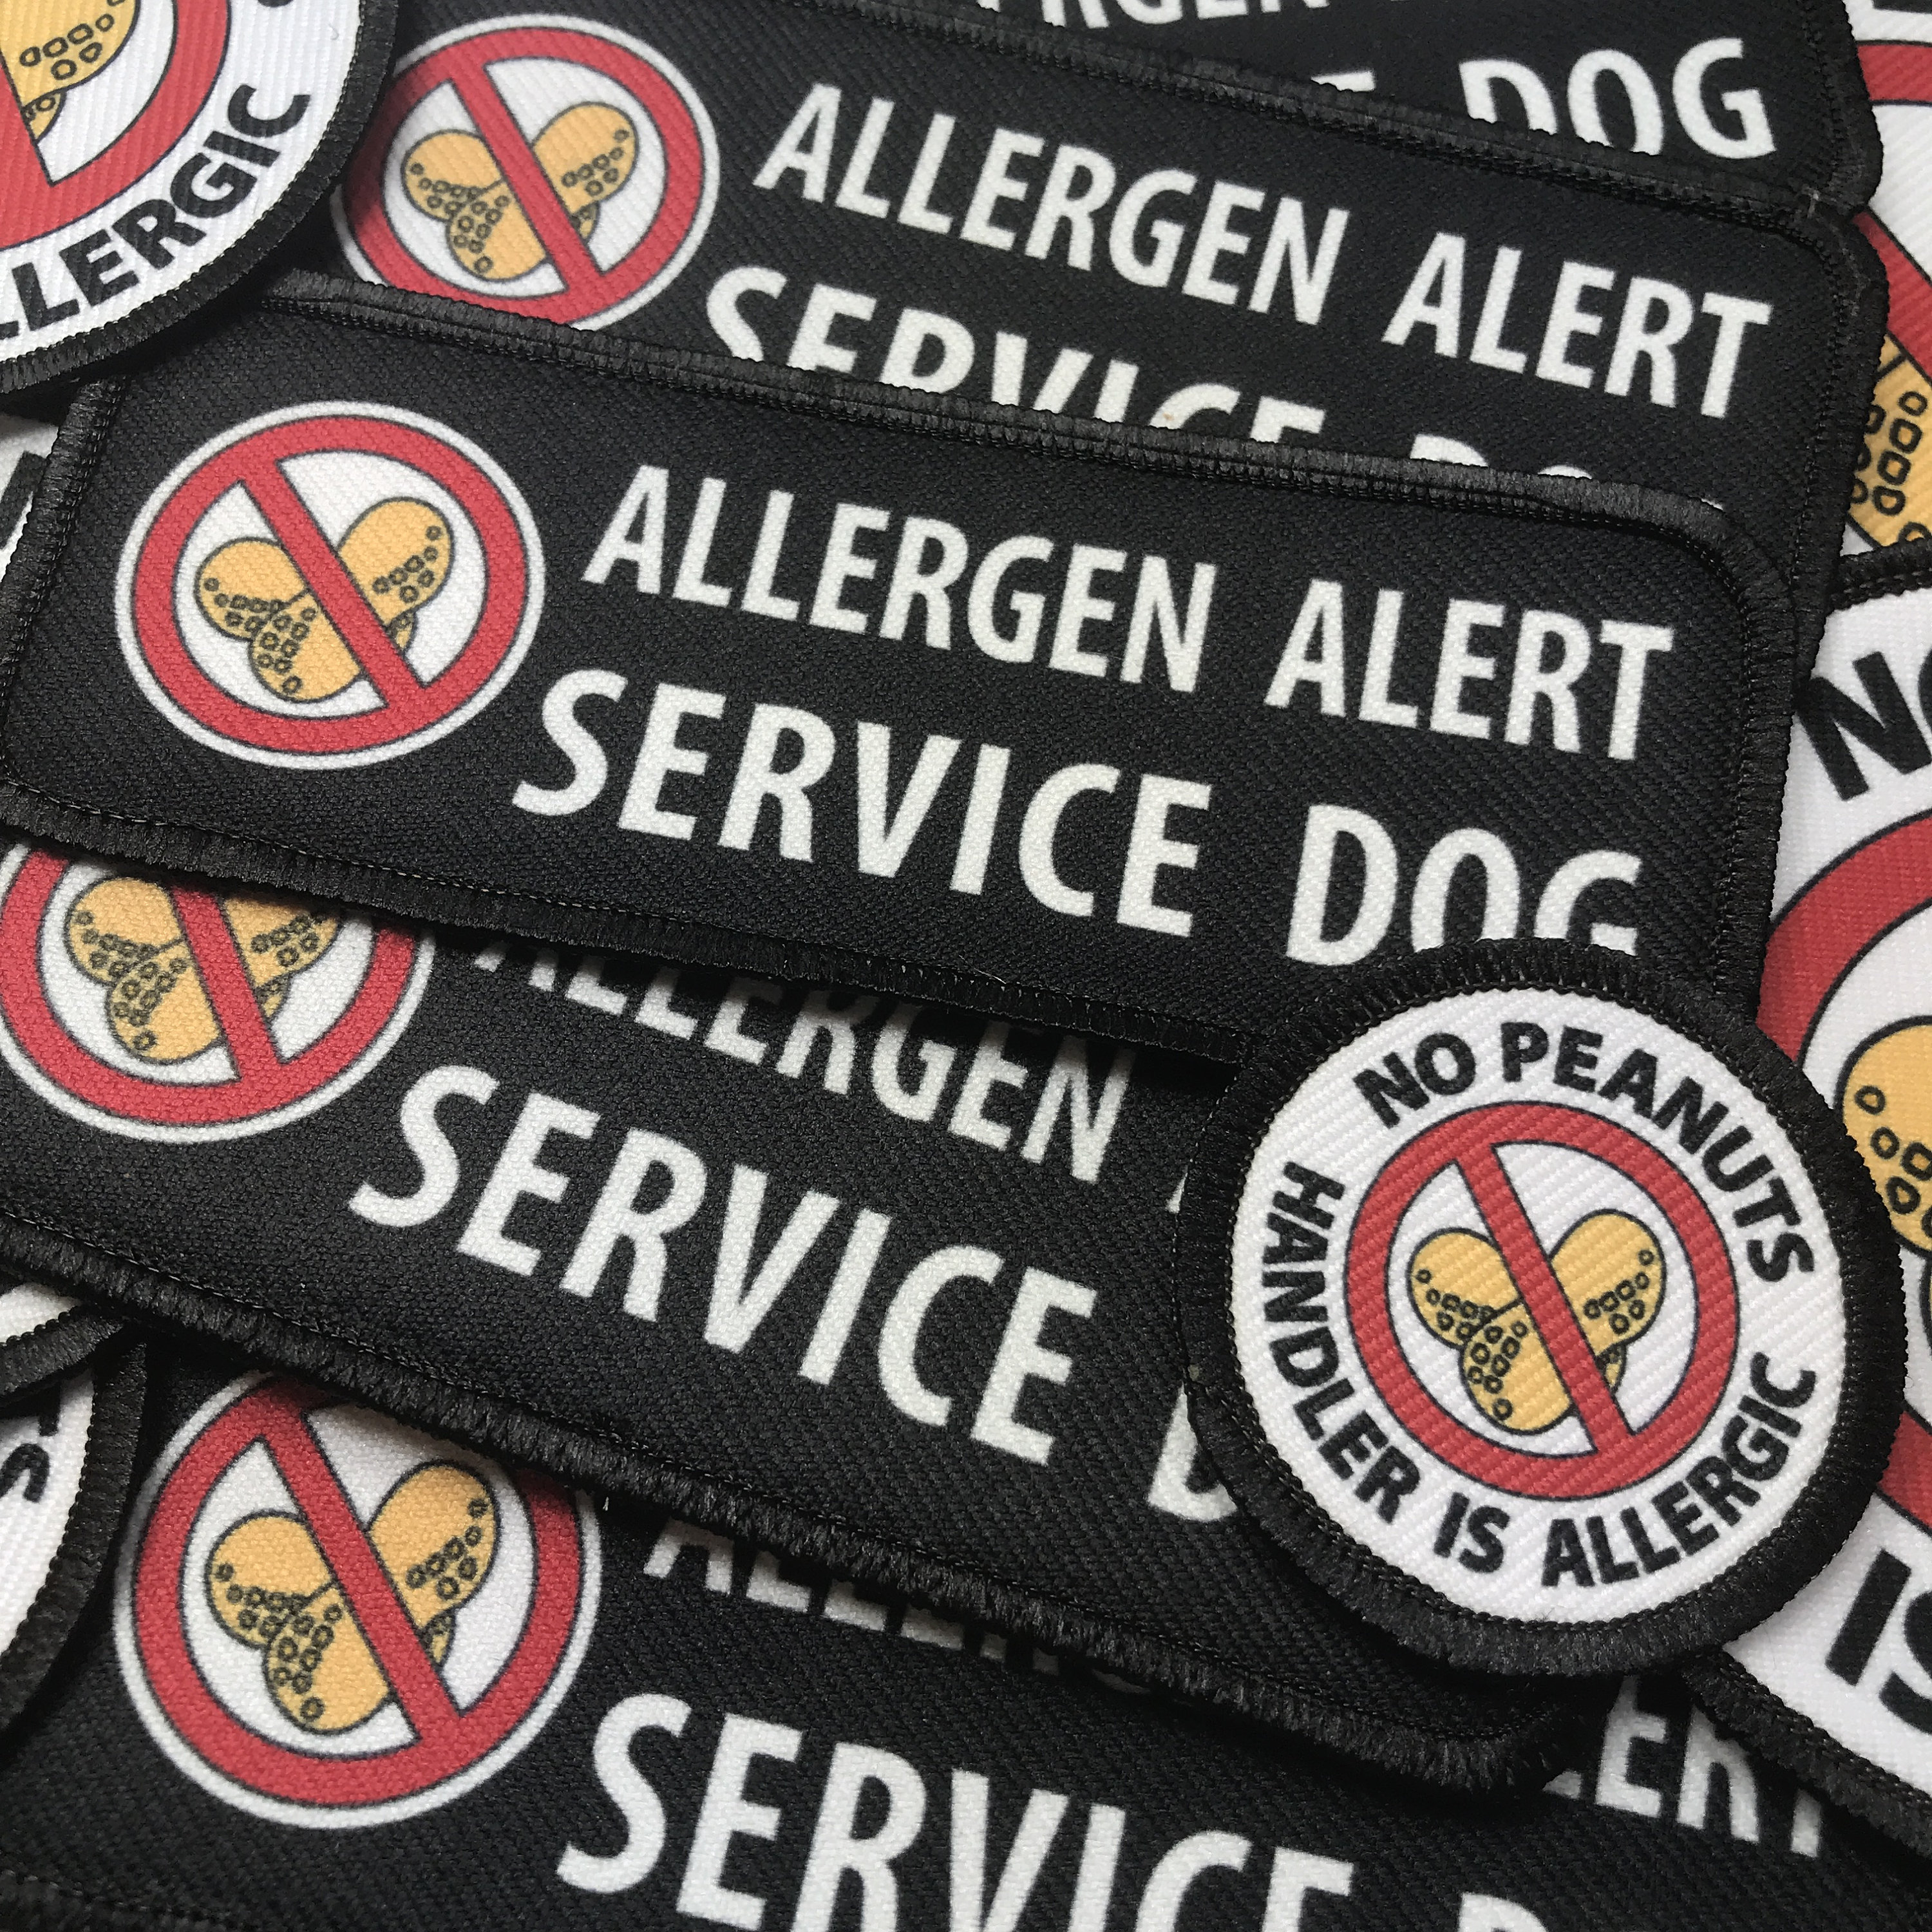 Service Dog Patch Vest Harness Cape Gear Patches Emergency Information Inside Patch Do Not Separate From Handler SewOn Patch